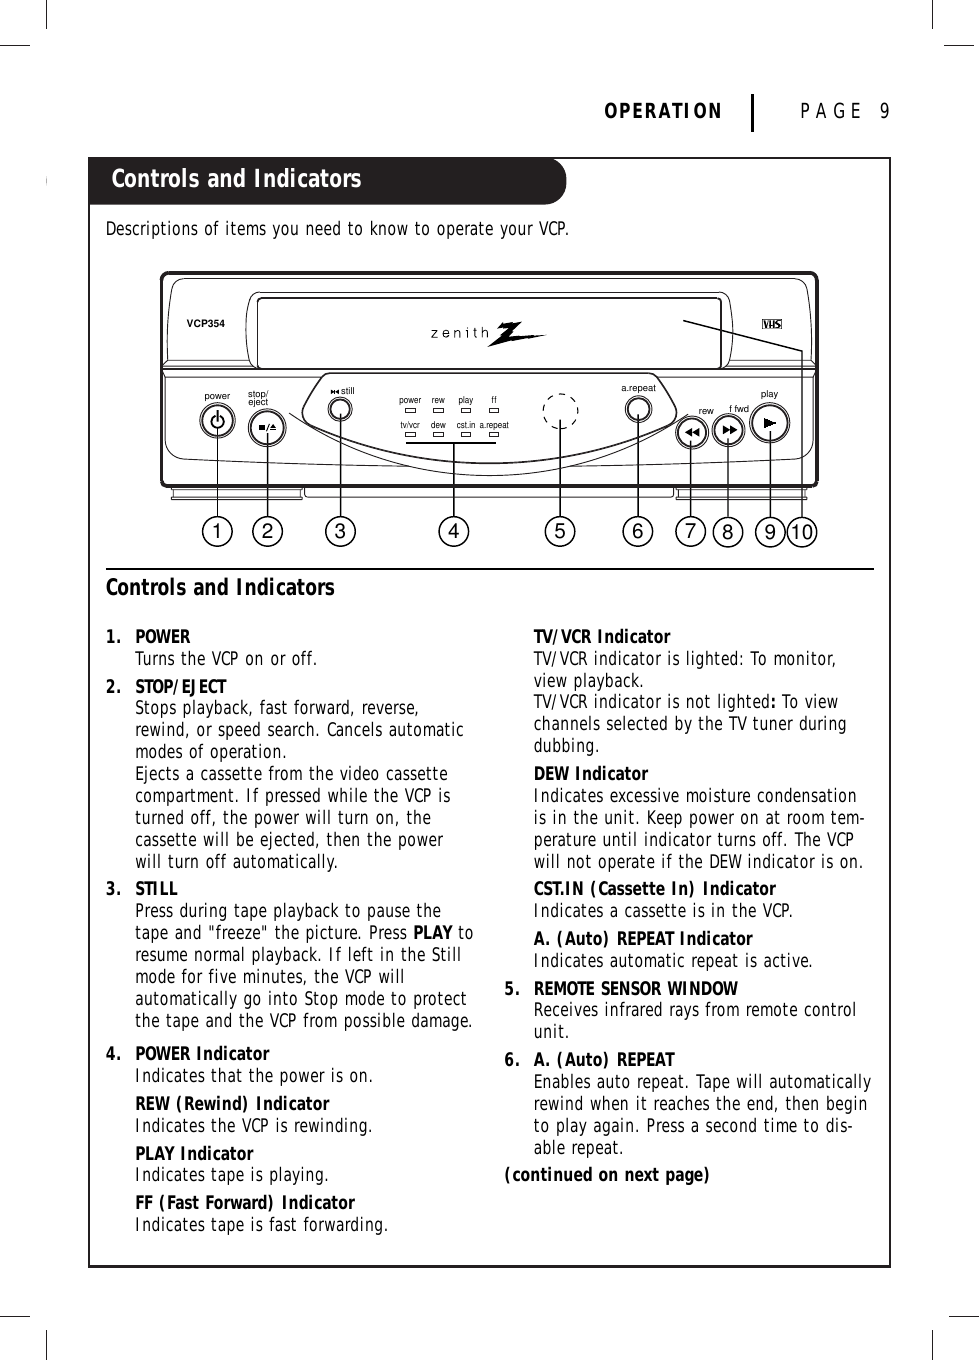 Controls and IndicatorsOPERATION PAGE 9Descriptions of items you need to know to operate your VCP.1. POWERTurns the VCP on or off.2. STOP/EJECTStops playback, fast forward, reverse,rewind, or speed search. Cancels automaticmodes of operation.Ejects a cassette from the video cassettecompartment. If pressed while the VCP isturned off, the power will turn on, the cassette will be ejected, then the powerwill turn off automatically.3. STILLPress during tape playback to pause thetape and &quot;freeze&quot; the picture. Press PLAY toresume normal playback. If left in the Stillmode for five minutes, the VCP will automatically go into Stop mode to protectthe tape and the VCP from possible damage.4. POWER IndicatorIndicates that the power is on.REW (Rewind) IndicatorIndicates the VCP is rewinding.PLAY IndicatorIndicates tape is playing.FF (Fast Forward) IndicatorIndicates tape is fast forwarding.TV/VCR IndicatorTV/VCR indicator is lighted: To monitor,view playback.TV/VCR indicator is not lighted:To viewchannels selected by the TV tuner duringdubbing.DEW IndicatorIndicates excessive moisture condensationis in the unit. Keep power on at room tem-perature until indicator turns off. The VCPwill not operate if the DEW indicator is on.CST.IN (Cassette In) IndicatorIndicates a cassette is in the VCP.A. (Auto) REPEAT IndicatorIndicates automatic repeat is active.5. REMOTE SENSOR WINDOW Receives infrared rays from remote controlunit.6. A. (Auto) REPEATEnables auto repeat. Tape will automaticallyrewind when it reaches the end, then beginto play again. Press a second time to dis-able repeat.(continued on next page) Controls and Indicators1 2 3 4 5 6 7 8 9 10power stop/eject still playrew f fwdpower rewdewplay f fcst.in a.repeata.repeattv/vcrVCP354